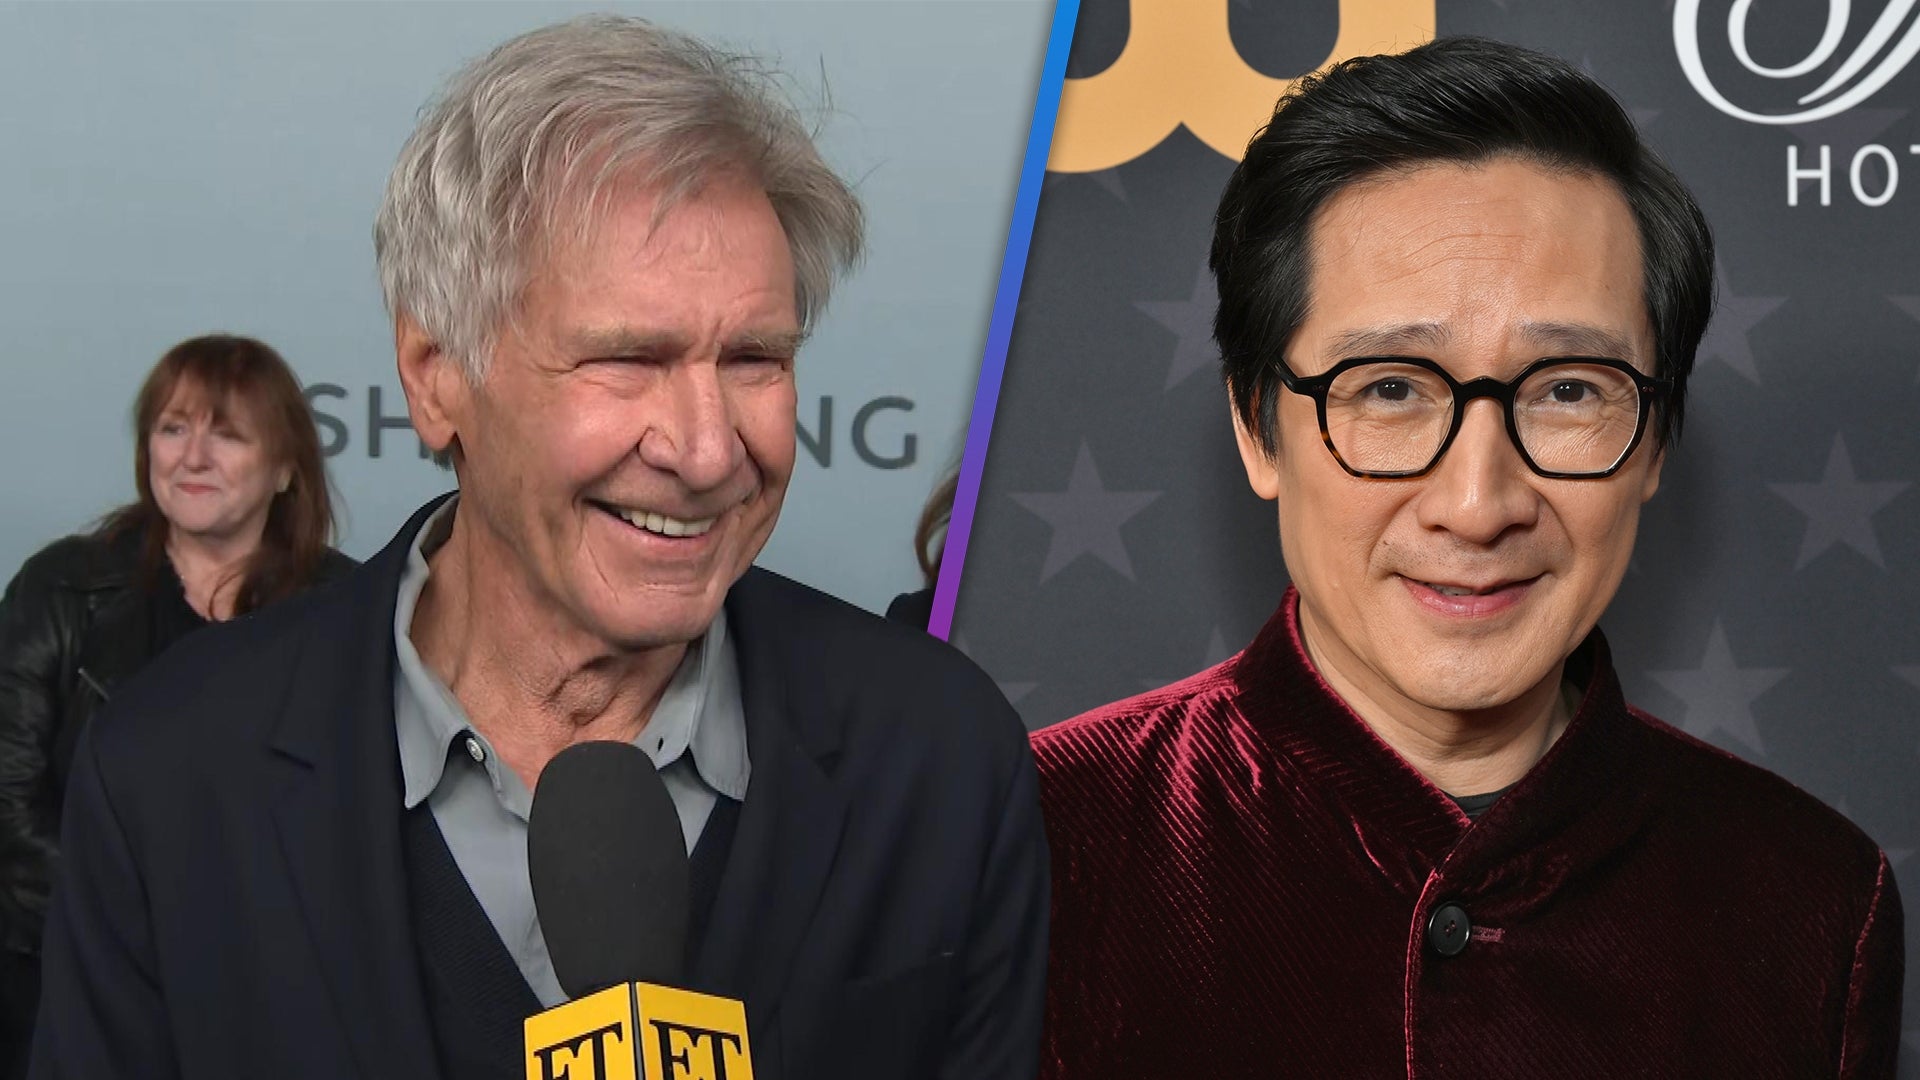 Harrison Ford Is 'So Happy' for Ke Huy Quan and His Oscar Nomination (Exclusive)